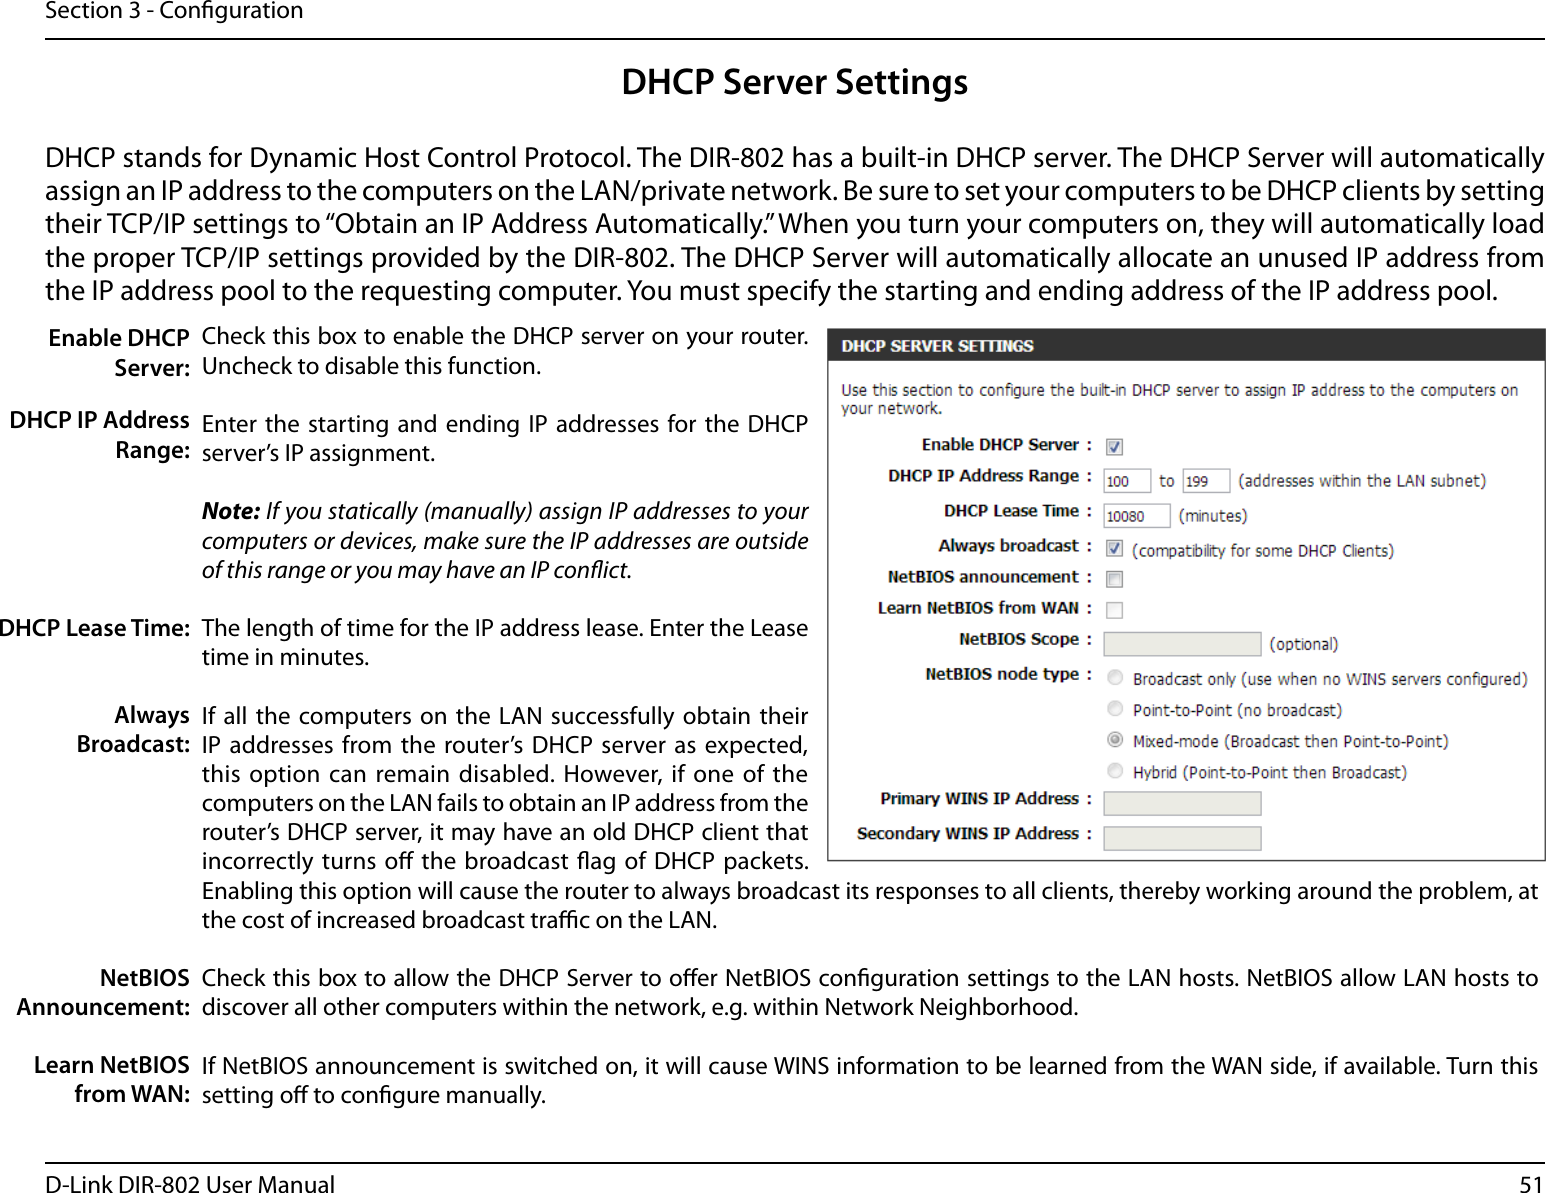 51D-Link DIR-802 User ManualSection 3 - CongurationDHCP Server SettingsDHCP stands for Dynamic Host Control Protocol. The DIR-802 has a built-in DHCP server. The DHCP Server will automatically assign an IP address to the computers on the LAN/private network. Be sure to set your computers to be DHCP clients by setting their TCP/IP settings to “Obtain an IP Address Automatically.” When you turn your computers on, they will automatically load the proper TCP/IP settings provided by the DIR-802. The DHCP Server will automatically allocate an unused IP address from the IP address pool to the requesting computer. You must specify the starting and ending address of the IP address pool.Check this box to enable the DHCP server on your router. Uncheck to disable this function.Enter the starting  and ending IP  addresses for the  DHCP server’s IP assignment.Note: If you statically (manually) assign IP addresses to your computers or devices, make sure the IP addresses are outside of this range or you may have an IP conict. The length of time for the IP address lease. Enter the Lease time in minutes.If all the  computers on the LAN  successfully obtain  their IP addresses from the router’s  DHCP server as expected, this option  can remain disabled. However, if  one  of the computers on the LAN fails to obtain an IP address from the router’s DHCP server, it may have an old DHCP client that incorrectly turns  o the broadcast ag of  DHCP packets. Enabling this option will cause the router to always broadcast its responses to all clients, thereby working around the problem, at the cost of increased broadcast trac on the LAN.Check this box to allow the DHCP Server to oer NetBIOS conguration settings to the LAN hosts. NetBIOS allow LAN hosts to discover all other computers within the network, e.g. within Network Neighborhood.If NetBIOS announcement is switched on, it will cause WINS information to be learned from the WAN side, if available. Turn this setting o to congure manually.Enable DHCP Server:DHCP IP Address Range:DHCP Lease Time:Always Broadcast:NetBIOS Announcement:Learn NetBIOS from WAN: